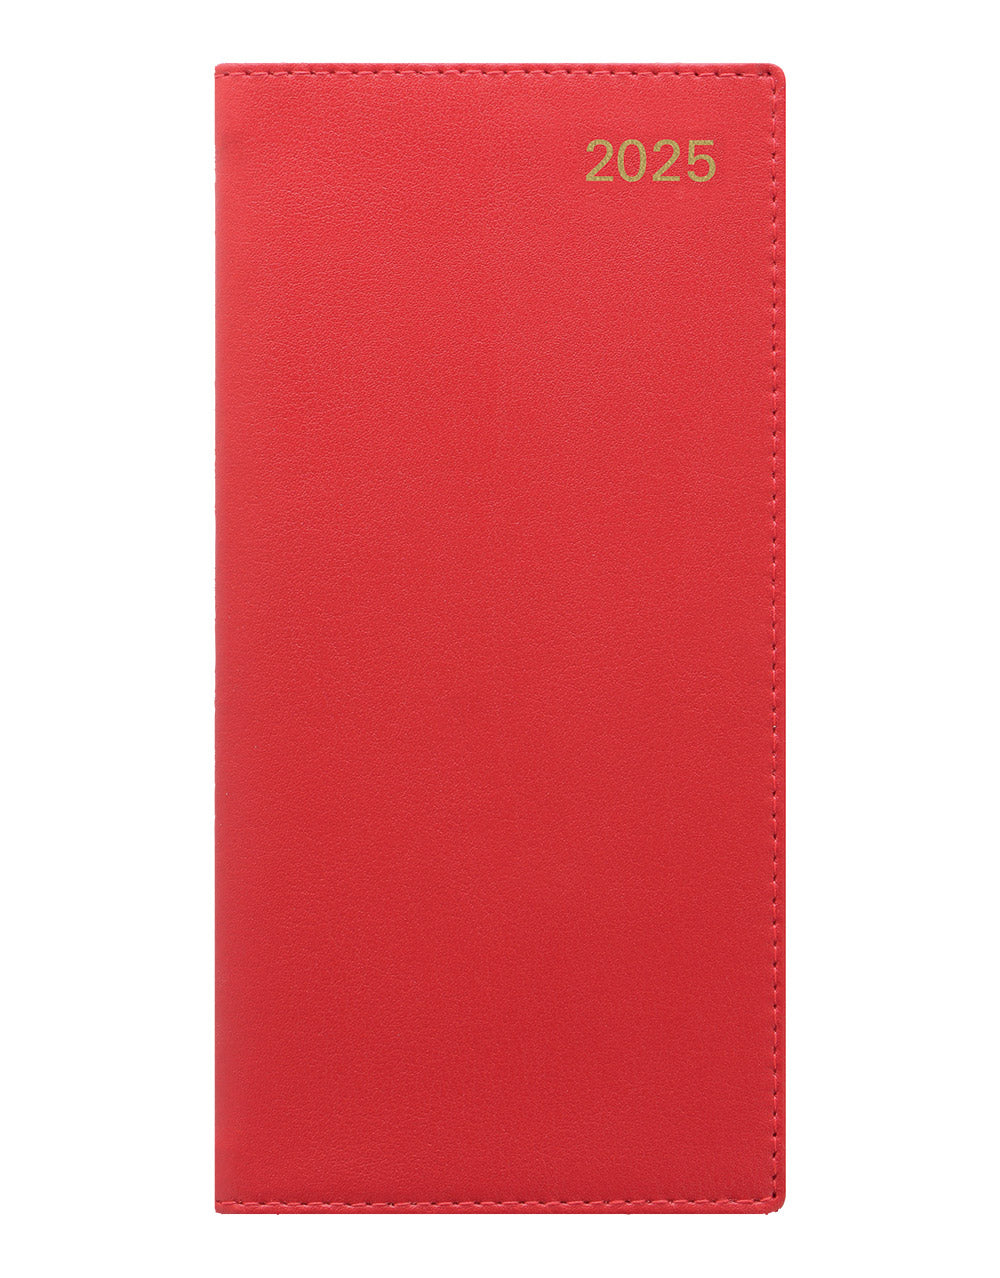 Belgravia Slim Week to View Leather Diary with Planners 2025 - English 25-C33SURD#color_red